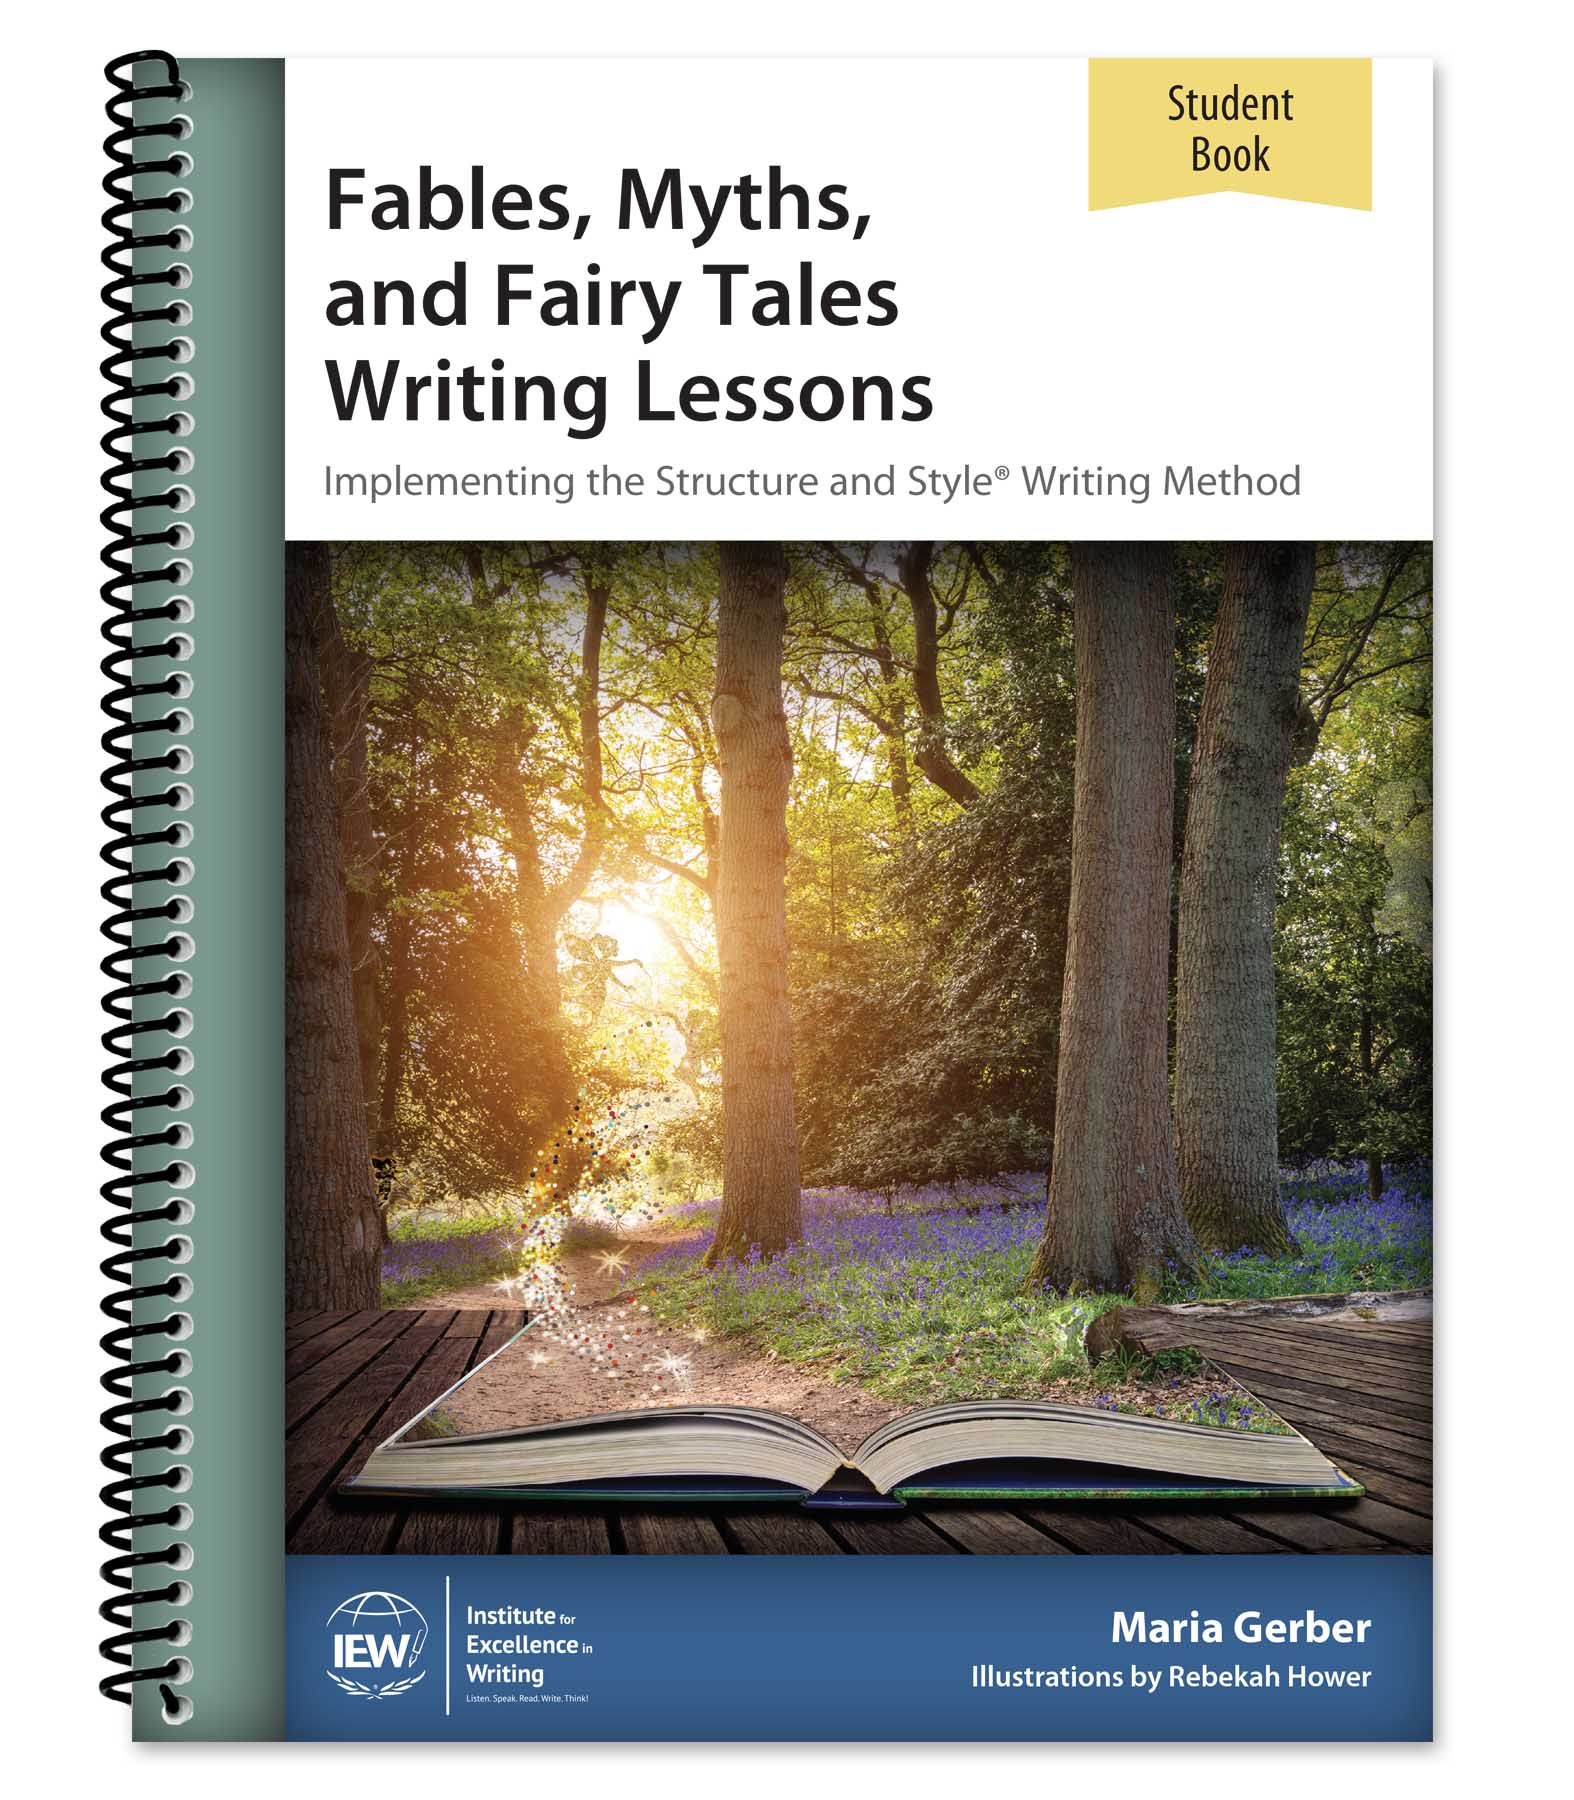 Fables, Myths, and Fairy Tales Writing Lessons [Student Book only]